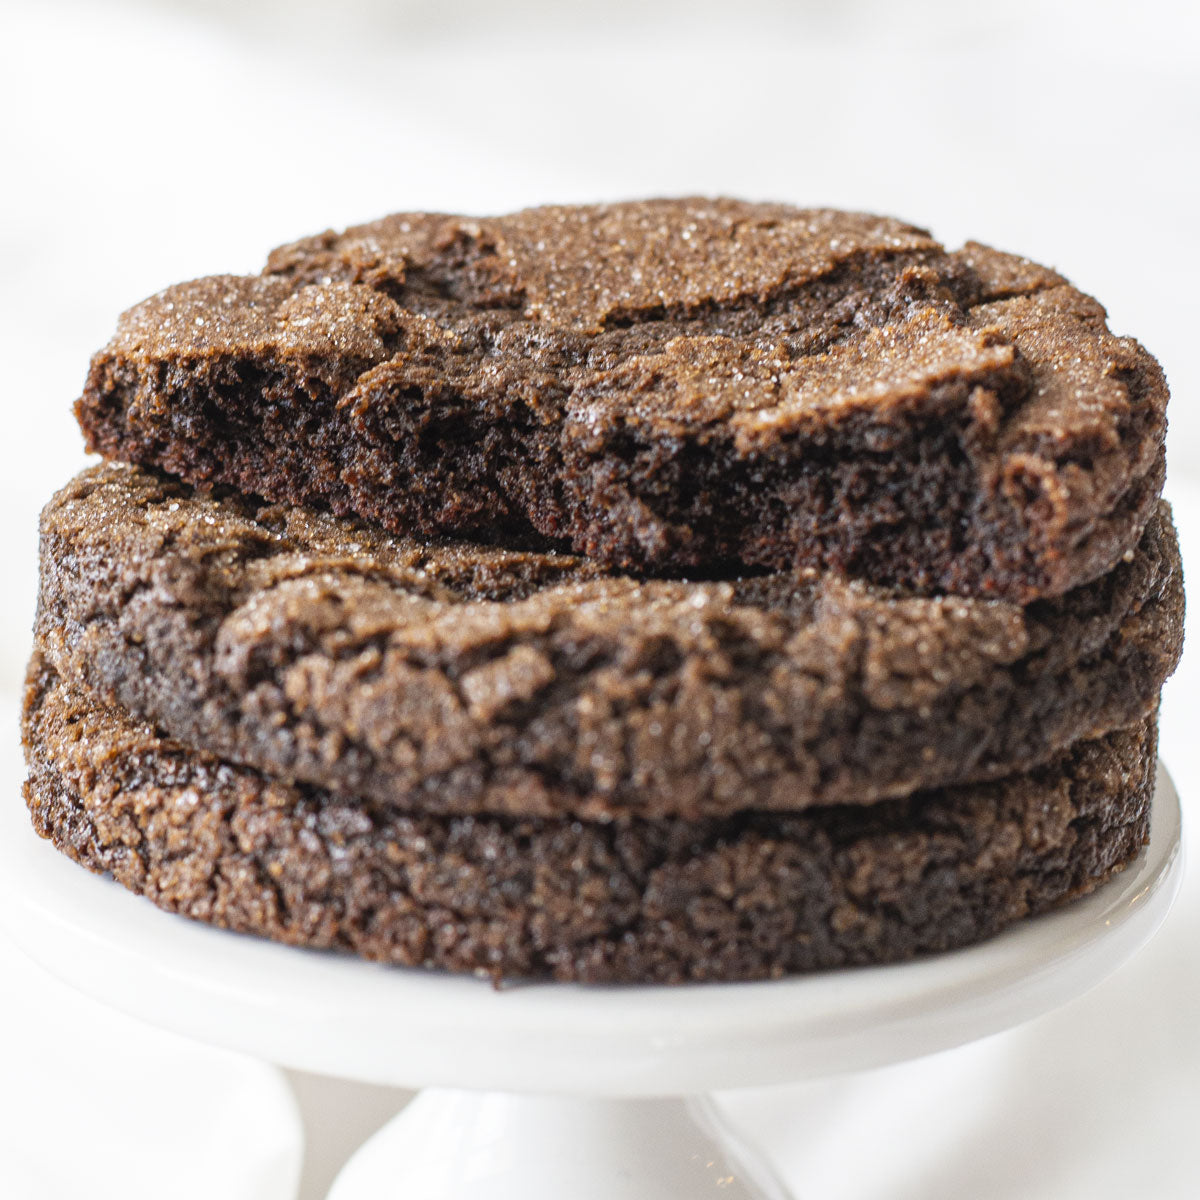 Chewy Chocolate Espresso Cookie stack